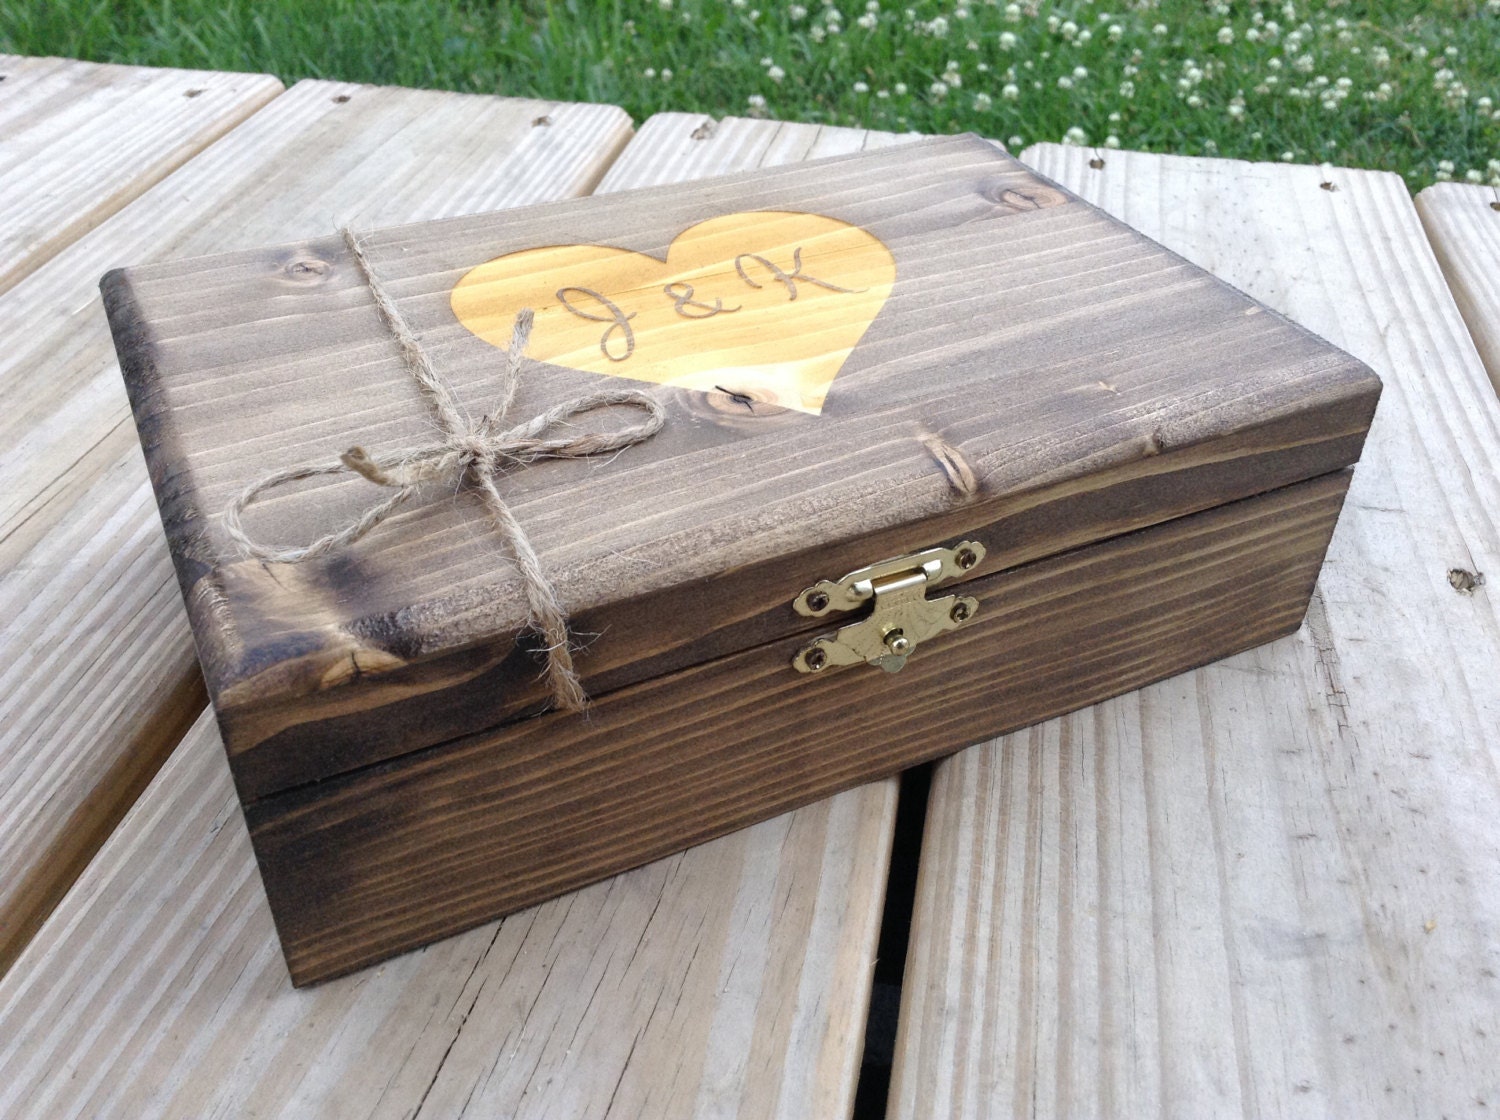 Large Personalized Box Engraved Wooden Keepsake by BloominBridal